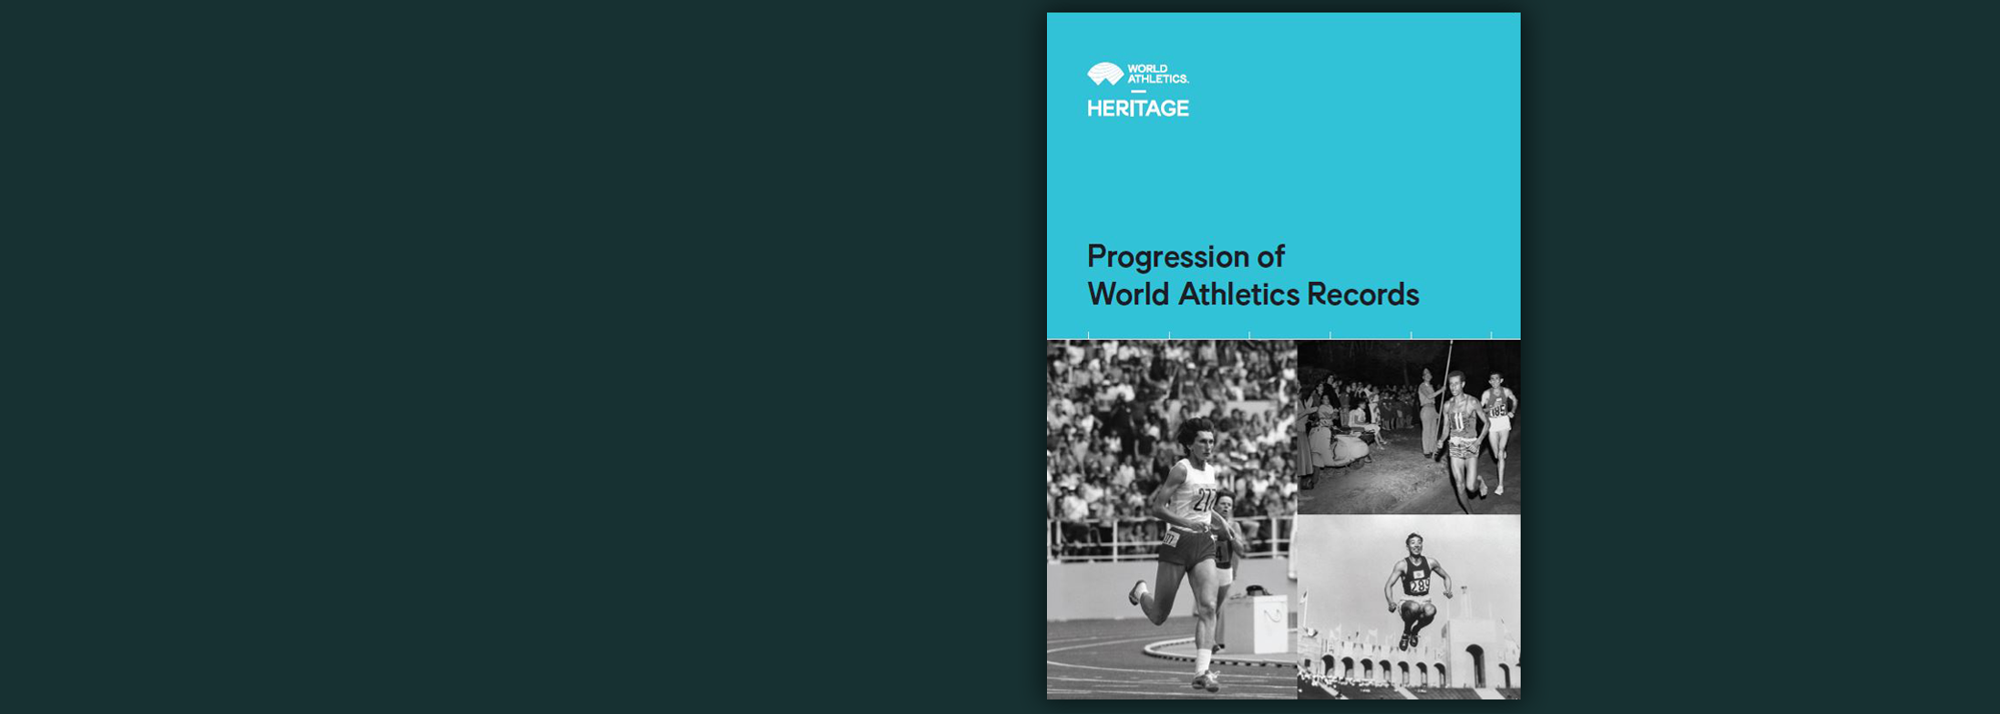 The latest edition of the ‘Progression of World Athletics Records’, published in 2020 by World Athletics Heritage, is now available as an ebook. 